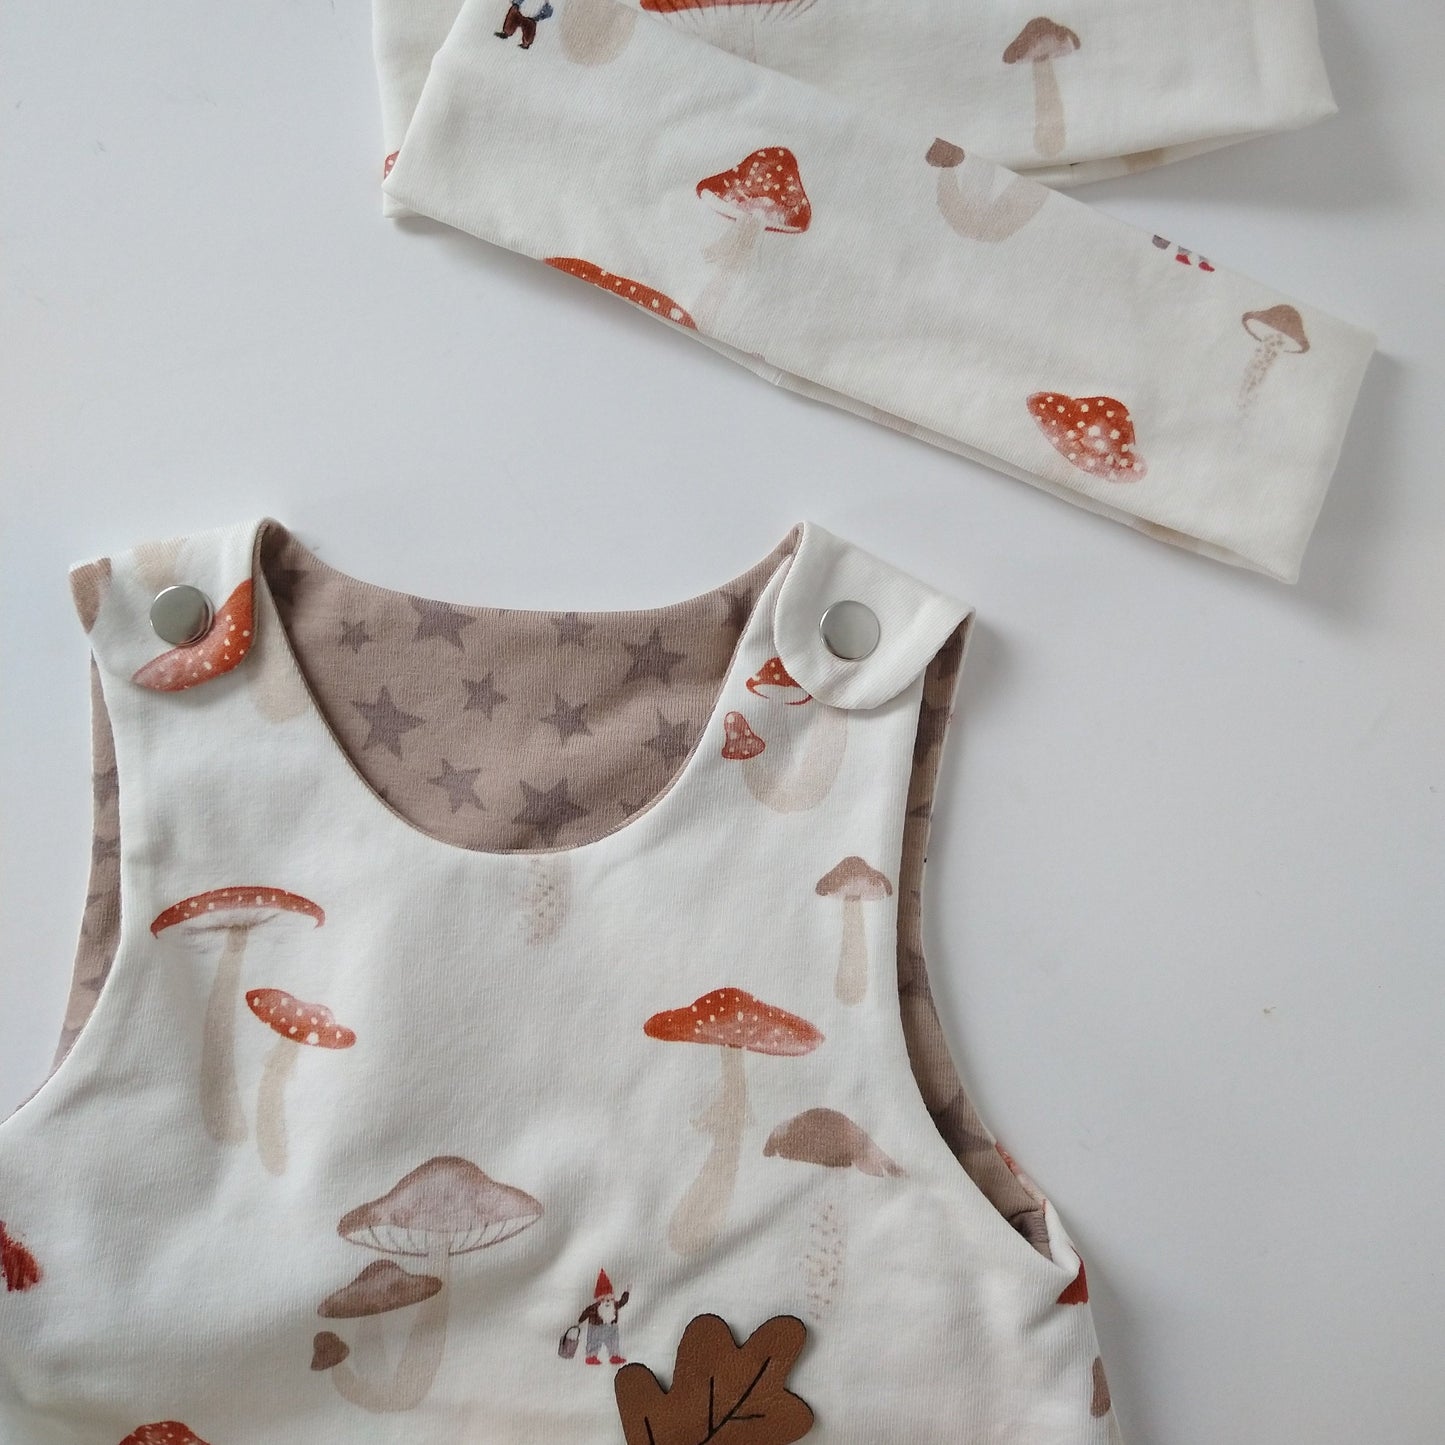 Baby romper, size EUR 68 cm / US 4-6 months, mushroom forest mix and match (Handmade in Canada)